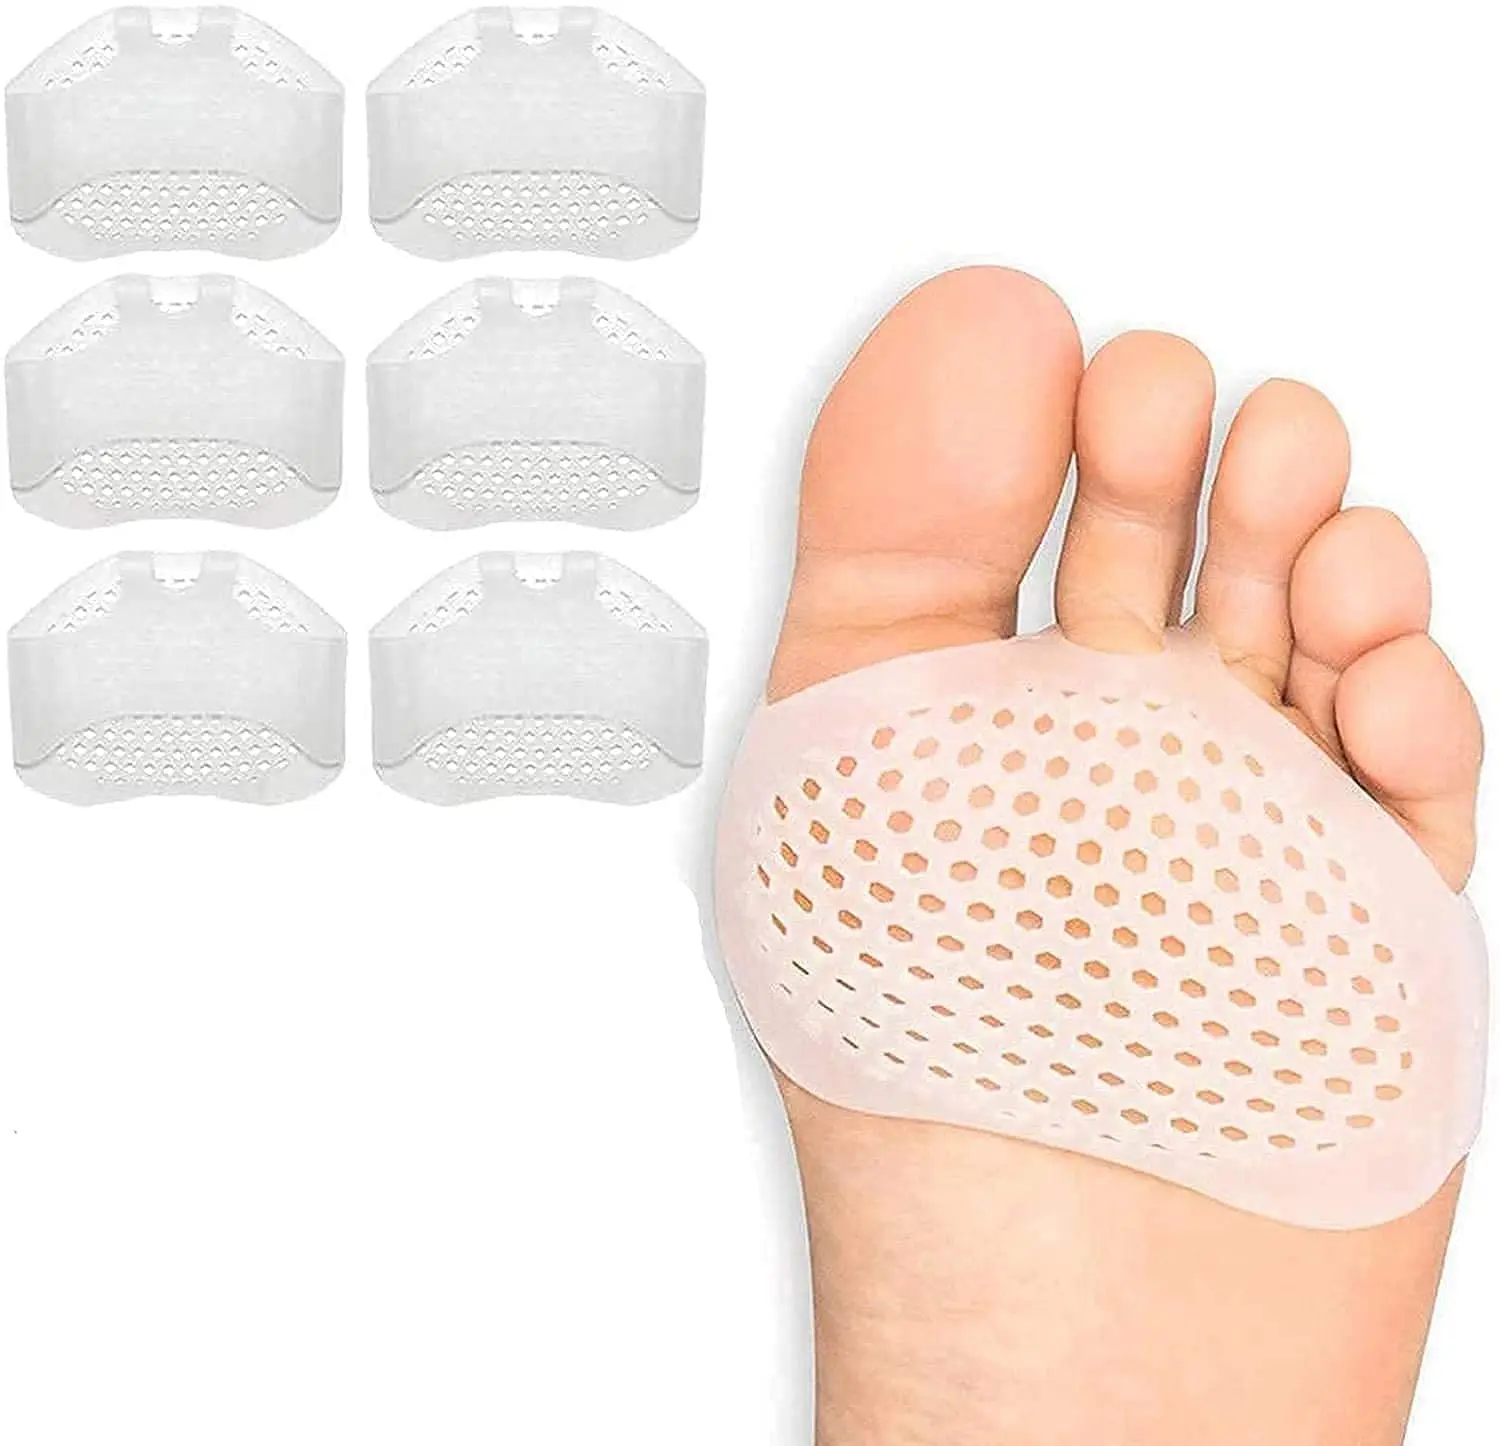 Metatarsal Pads 6 Pack Ball of Foot Cushions for Women and Men Soft Gel Foot Pads Pain Relief Forefoot Pad Insoles Transparent